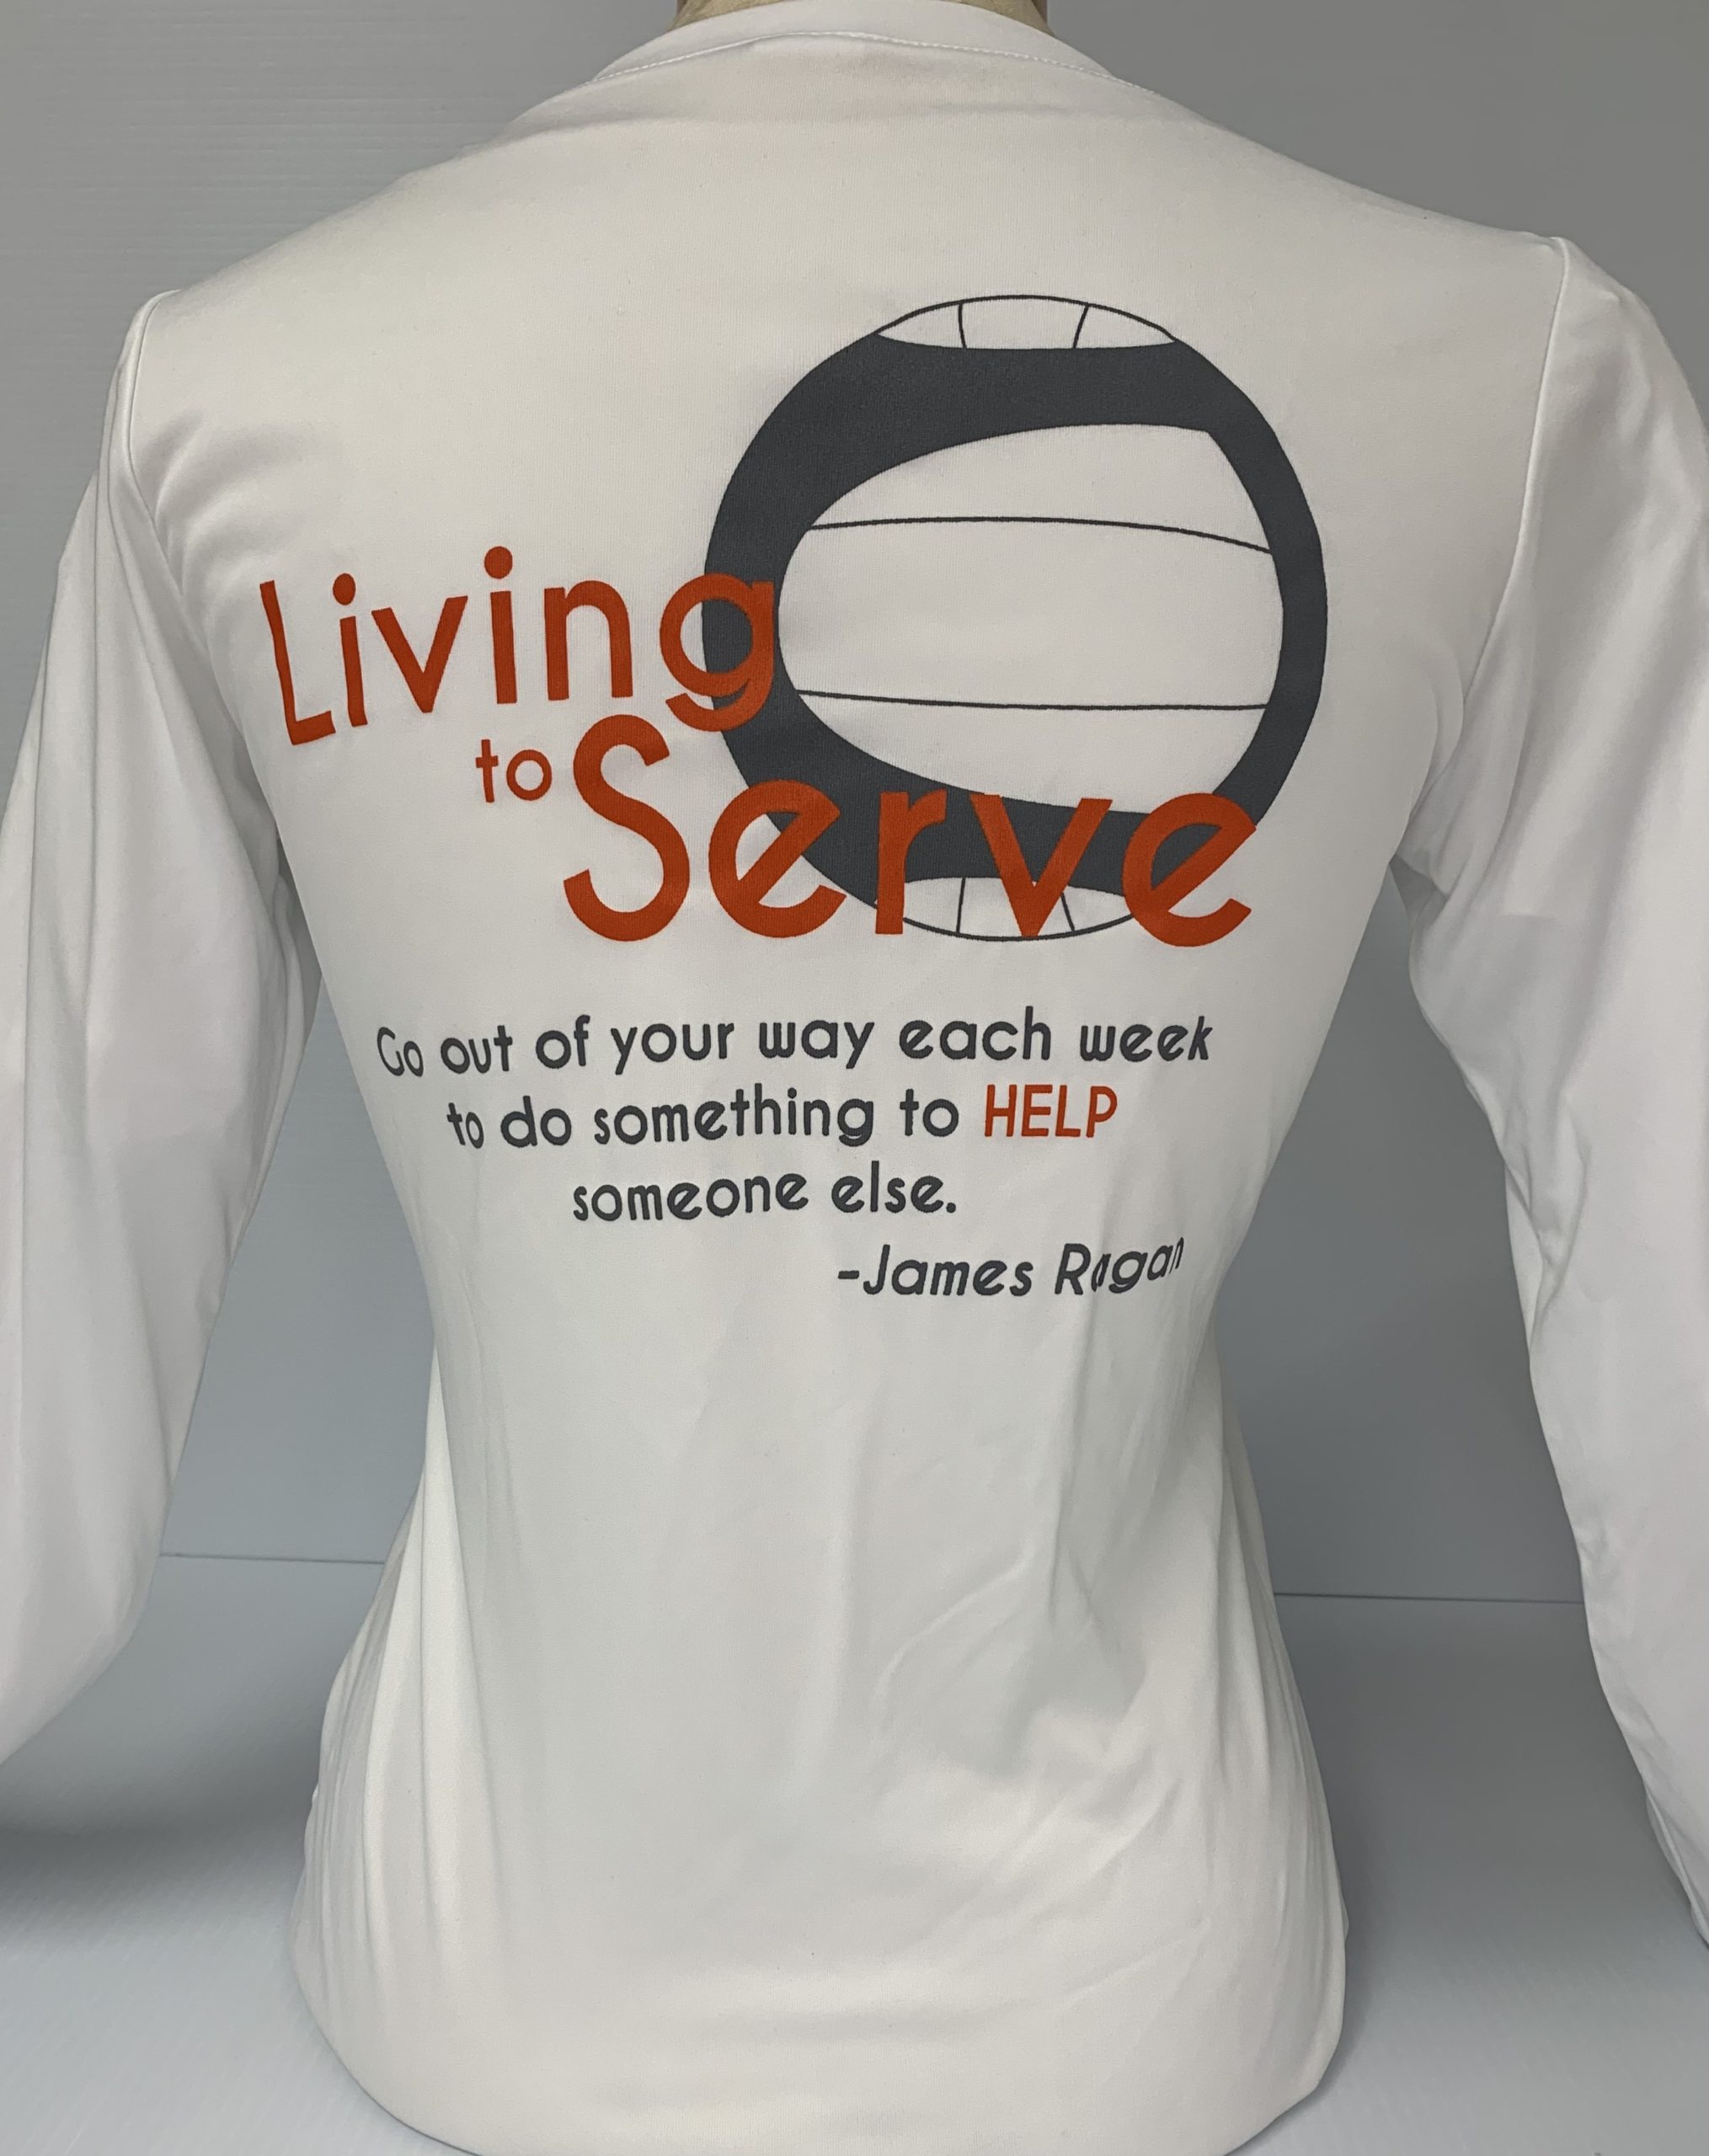 TOKC-Living-To-Serve-Youth-T-Shirts-Back-scaled-1-1.jpg